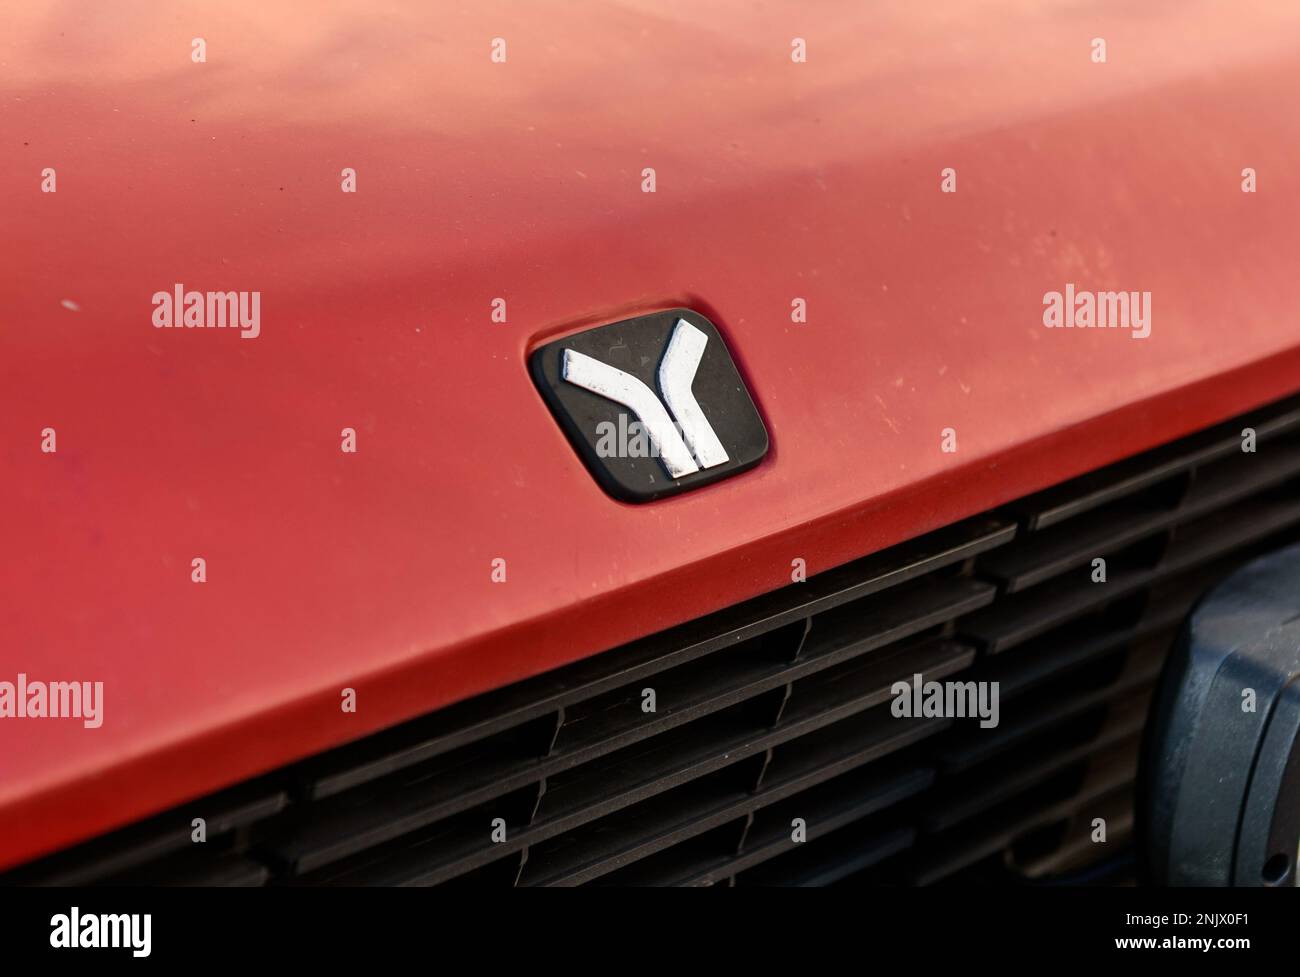 Close-up of Yugo logo on front hood of a red car Stock Photo